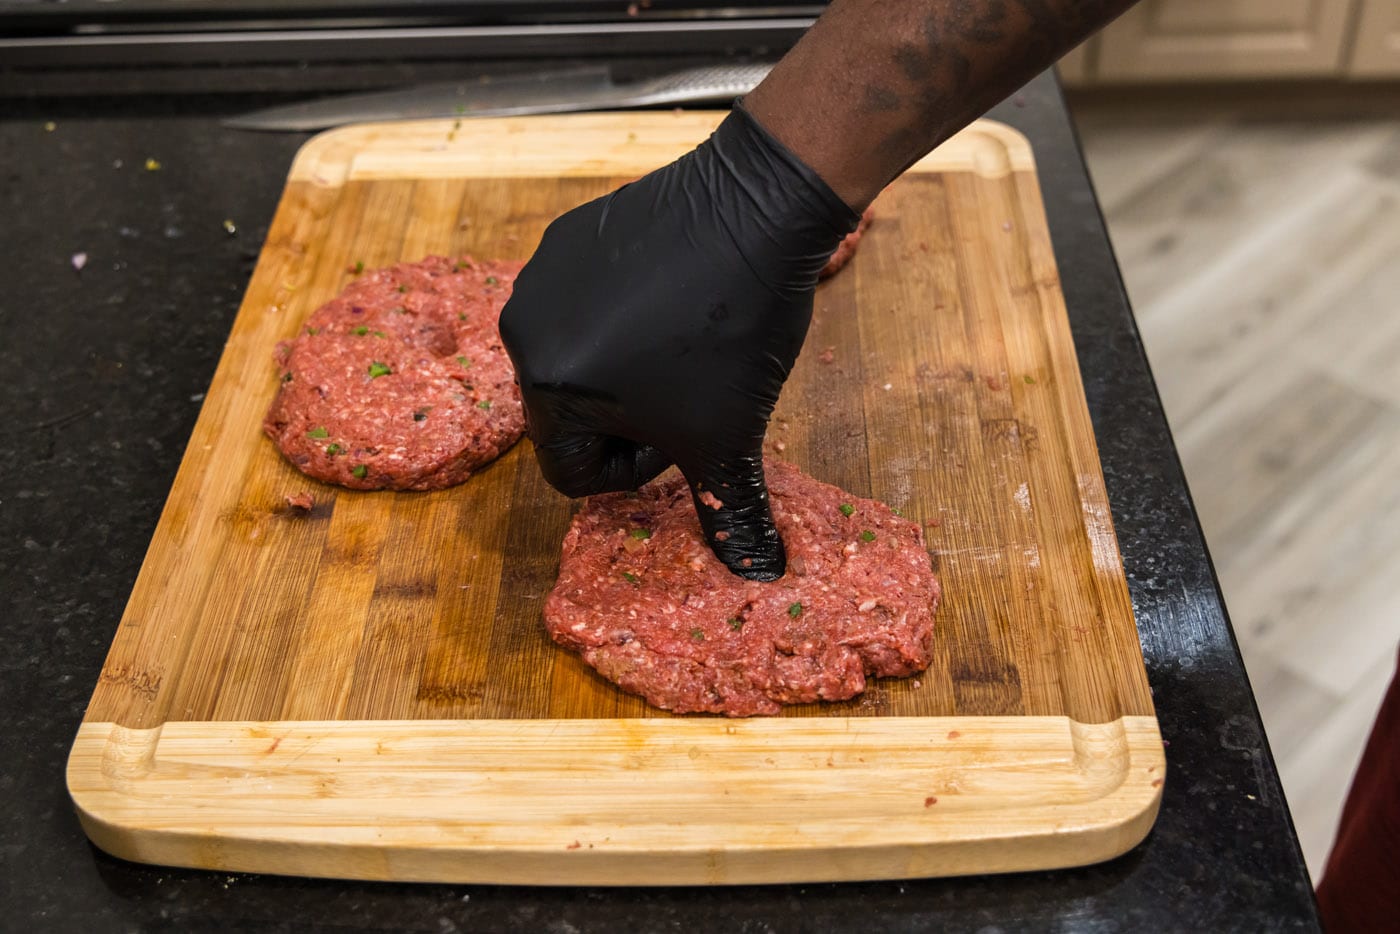 pressing thumb into center of bison burgers